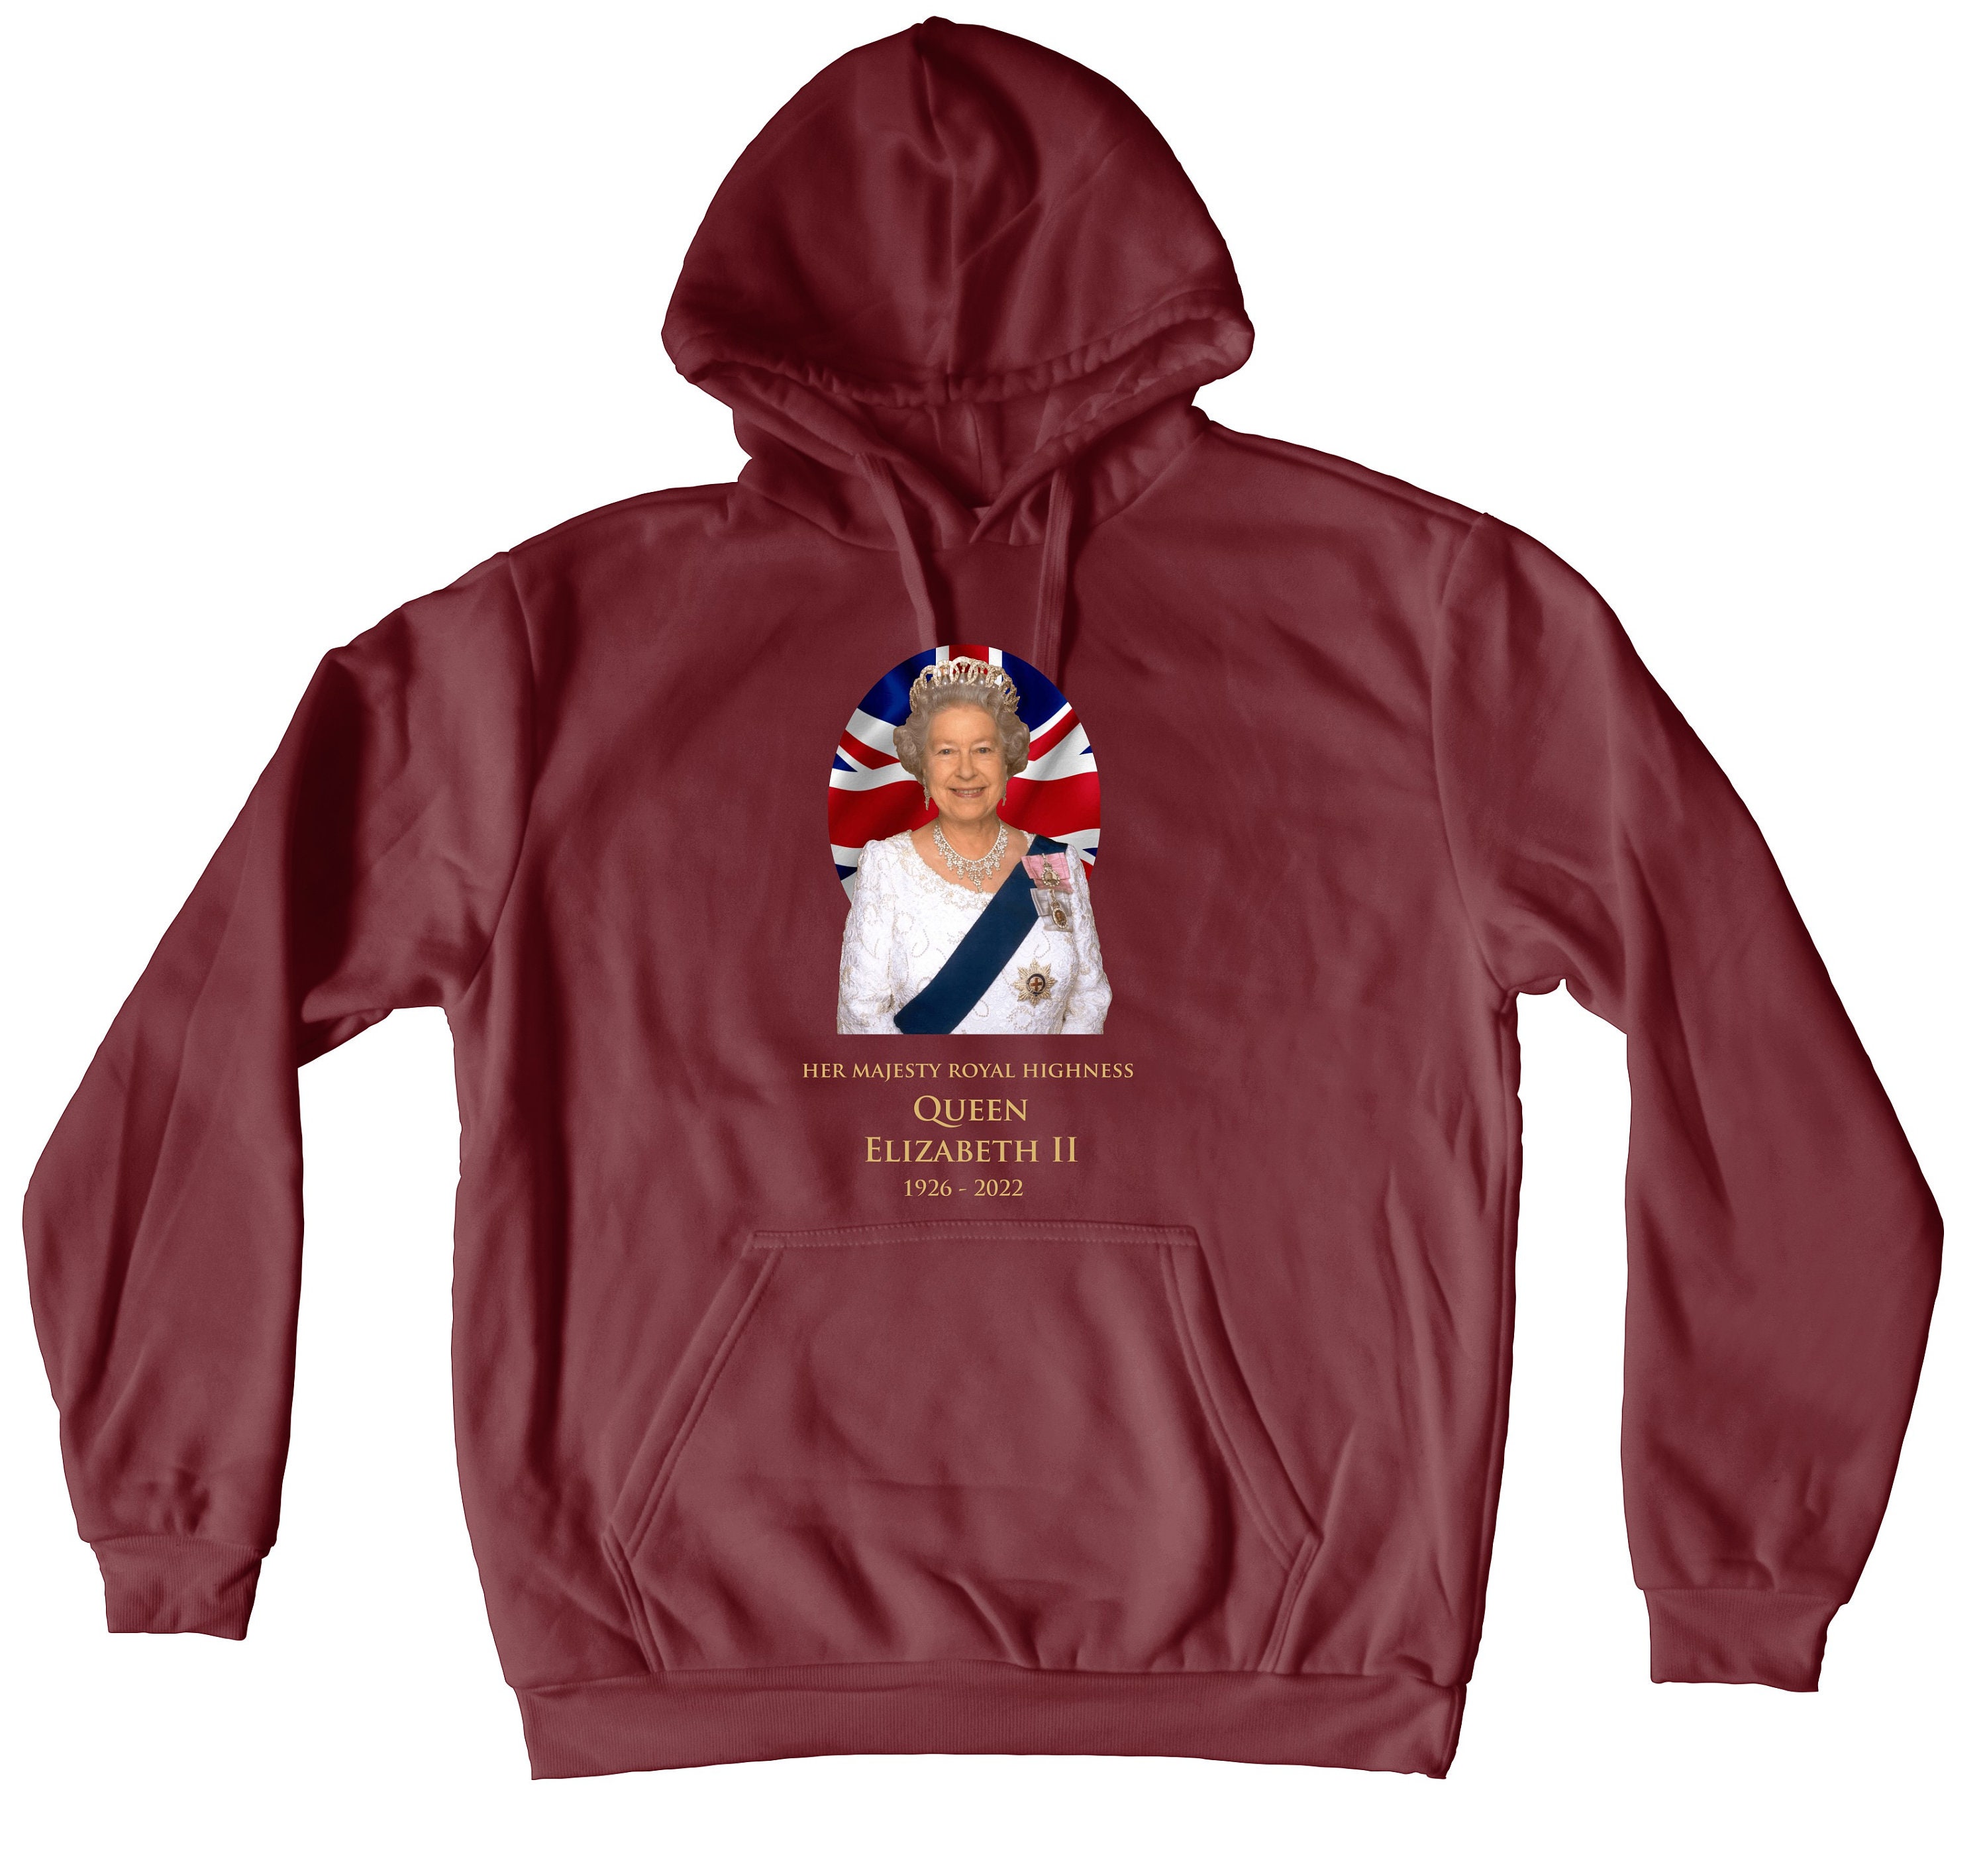 Discover Queen elizabeth ii old her majesty royal highness hoodie